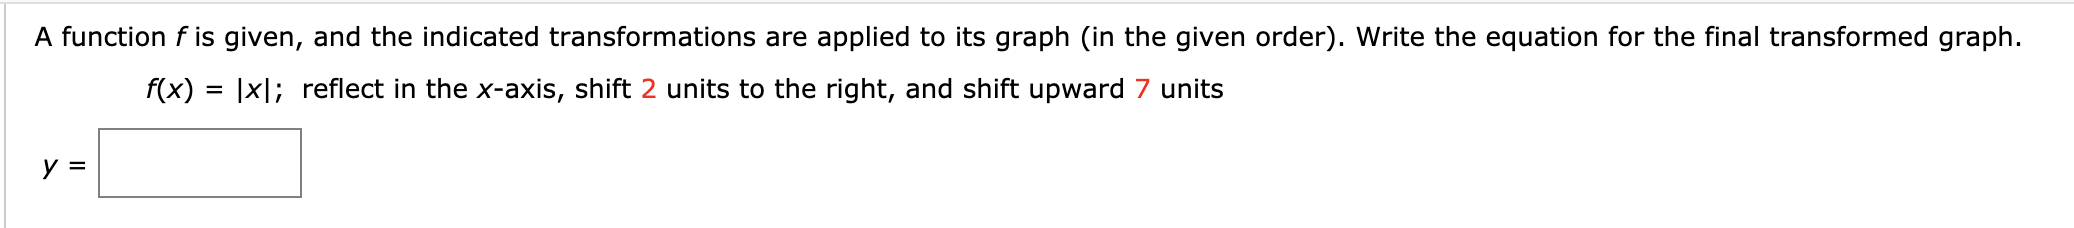 A function f is given, and the indicated transformations are applied to its graph (in the given order). Write the equation for the final transformed graph
f(x) |x; reflect in the x-axis, shift 2 units to the right, and shift upward 7 units
y
=
